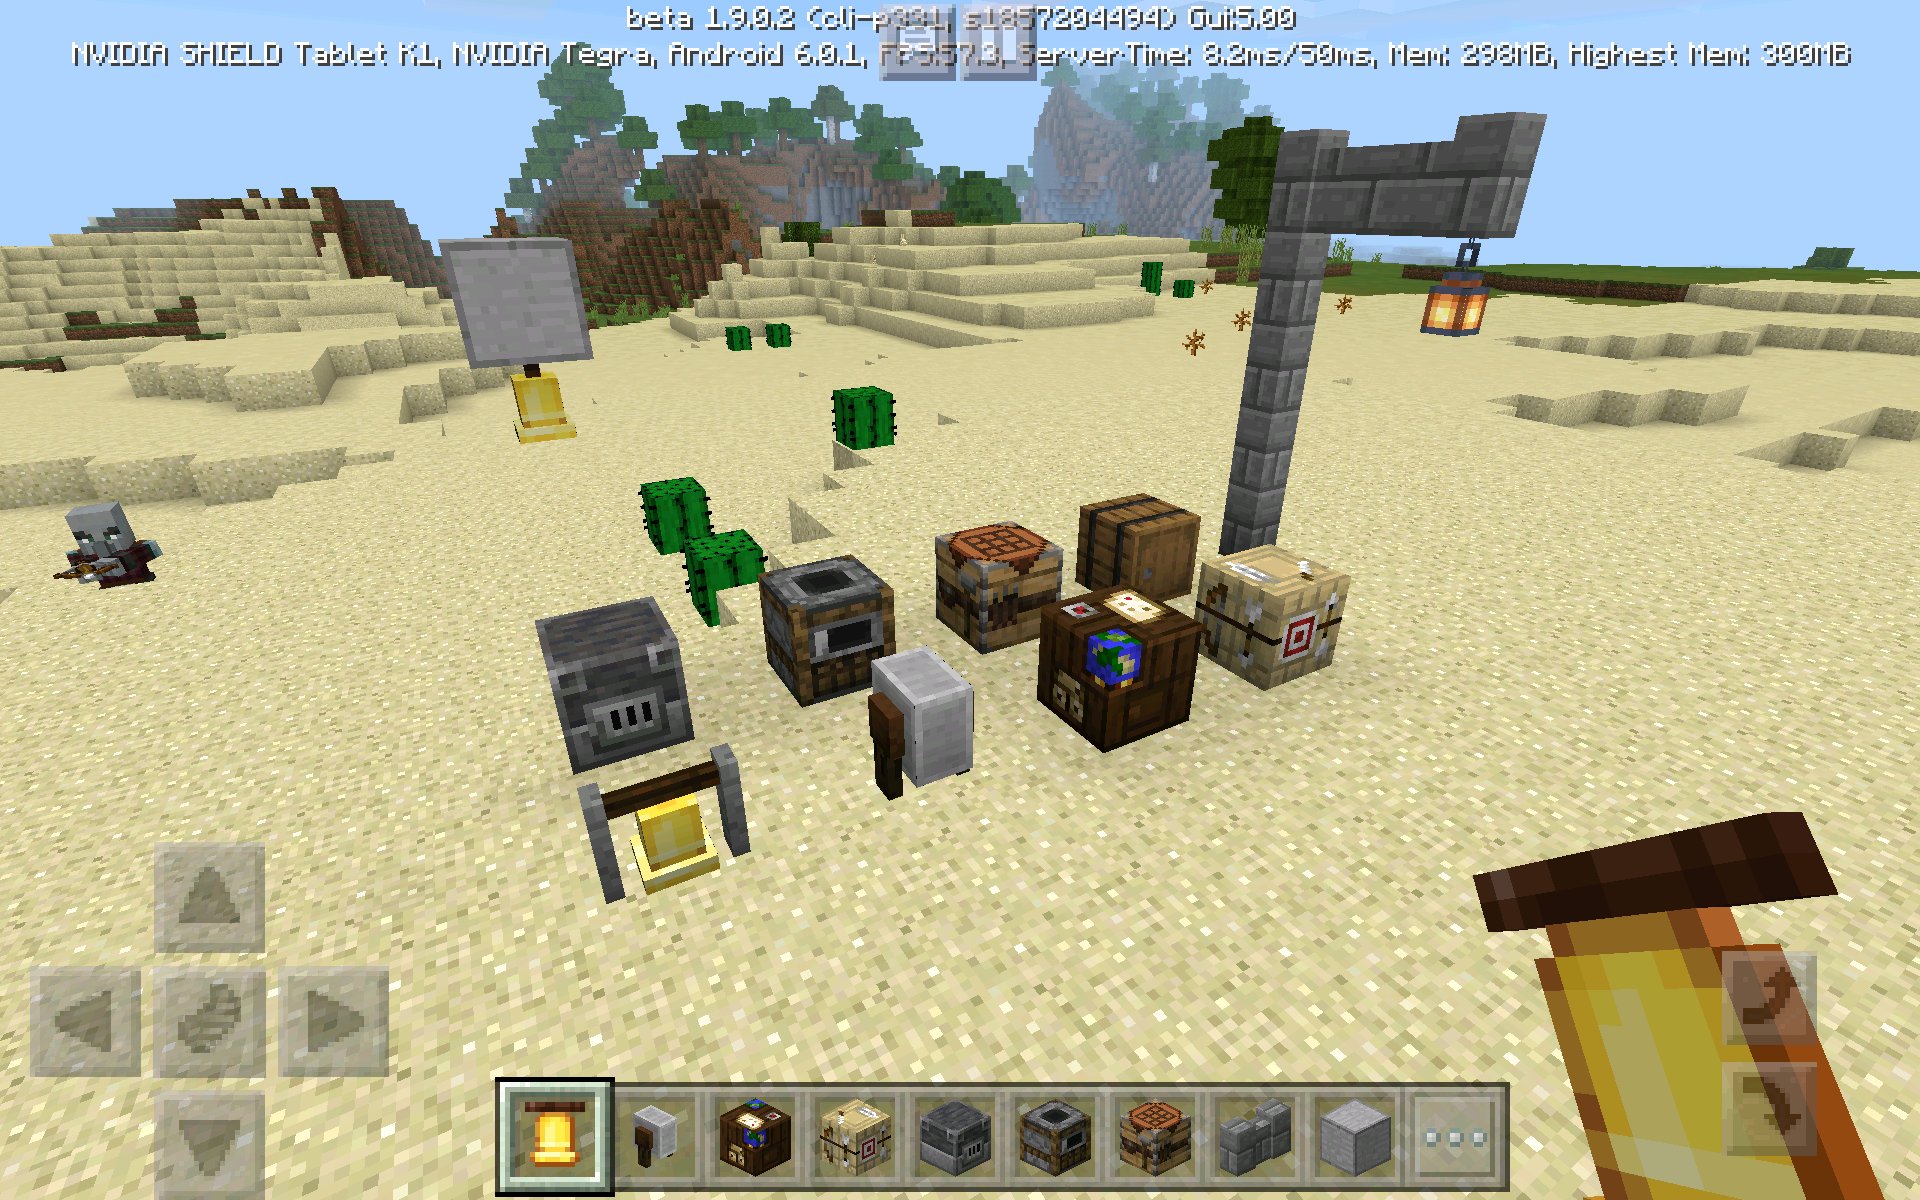 Minecraft News on X: Here's an image of the NEW Blocks added in